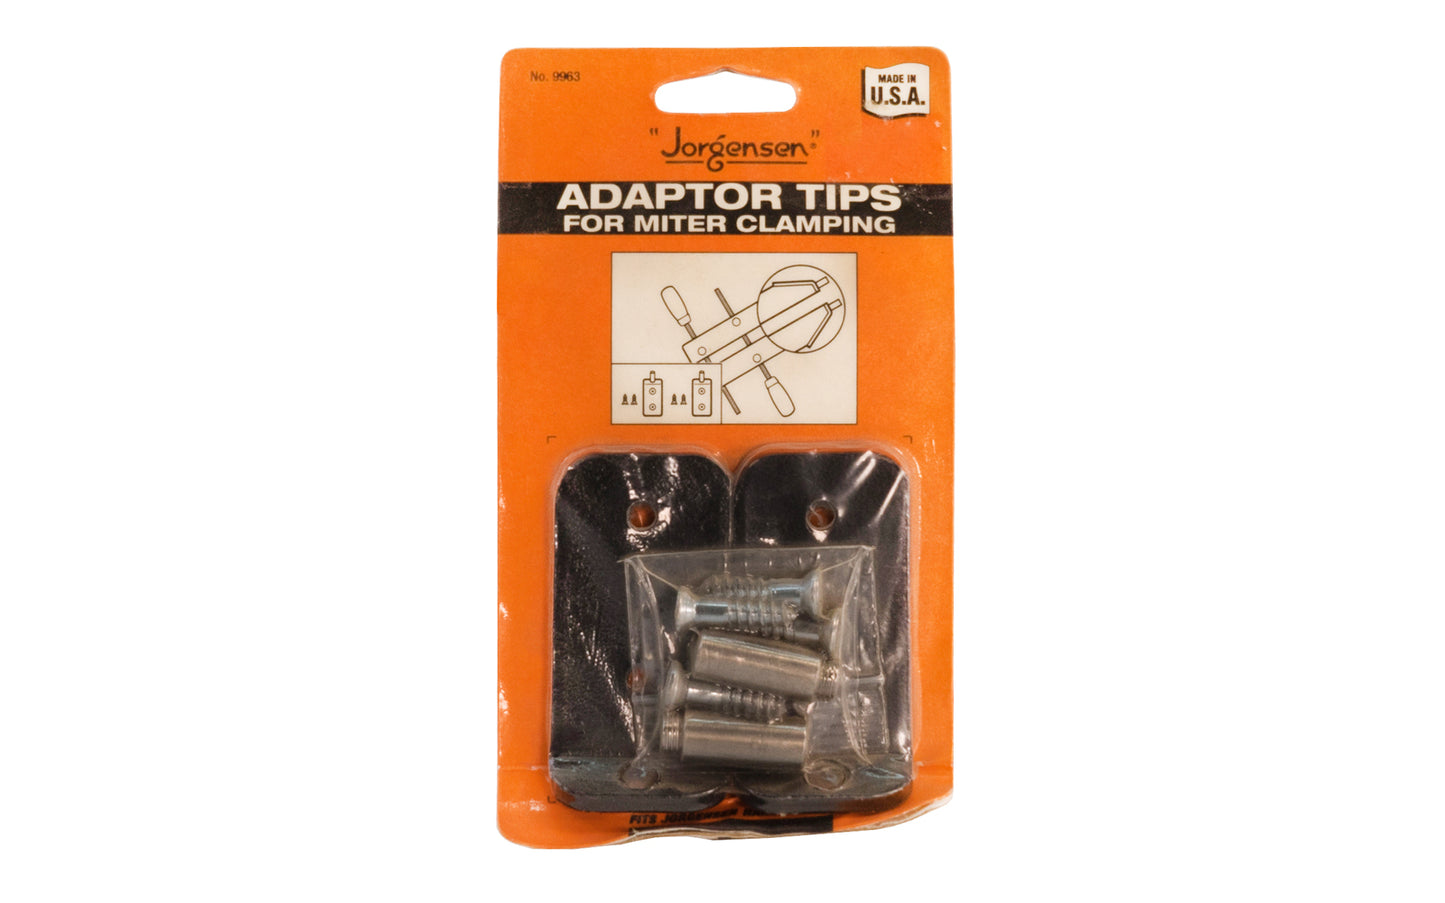 Jorgensen Adaptor Tips for Miter Clamping - 9963.  Made in USA. 044295996303